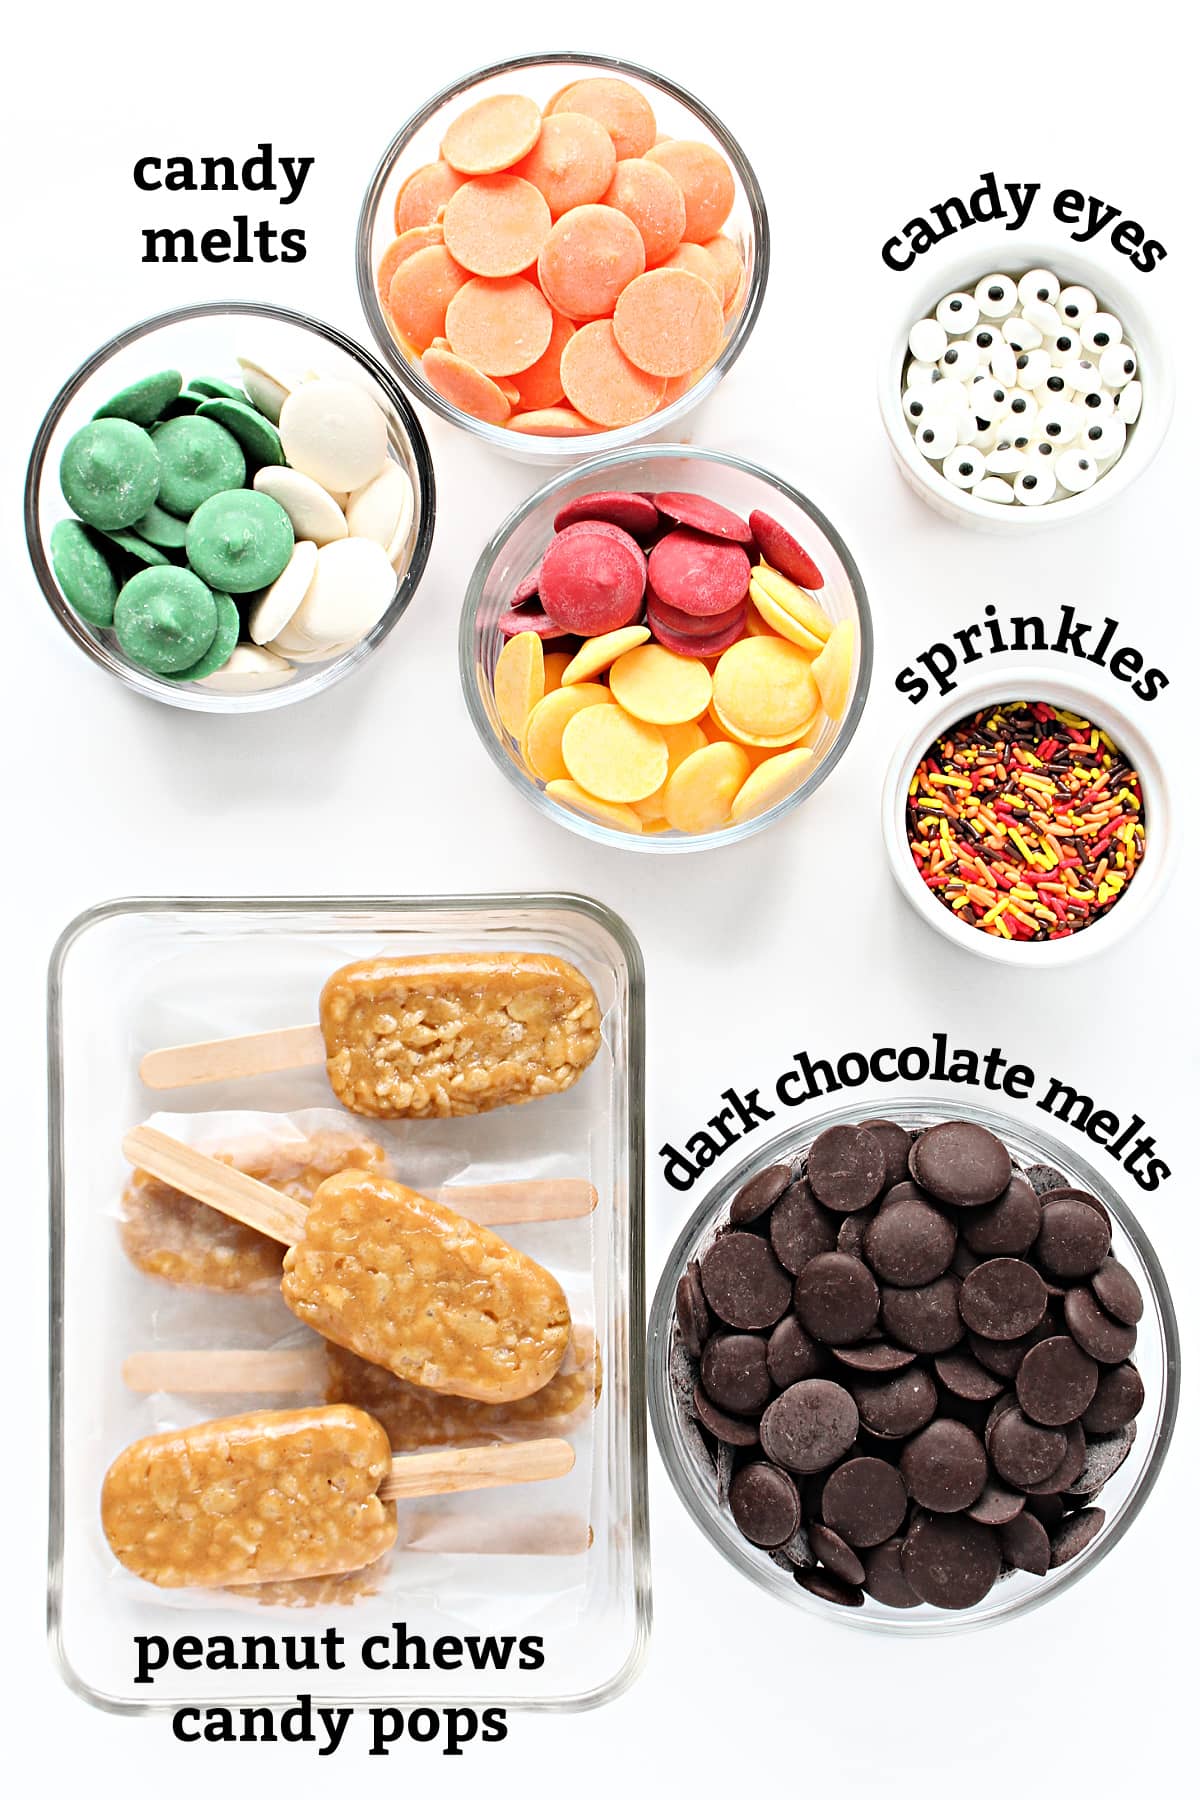 ingredients: colored candy melts, dark chocolate melts, candy eyes, sprinkles, peanut chews candy pops.